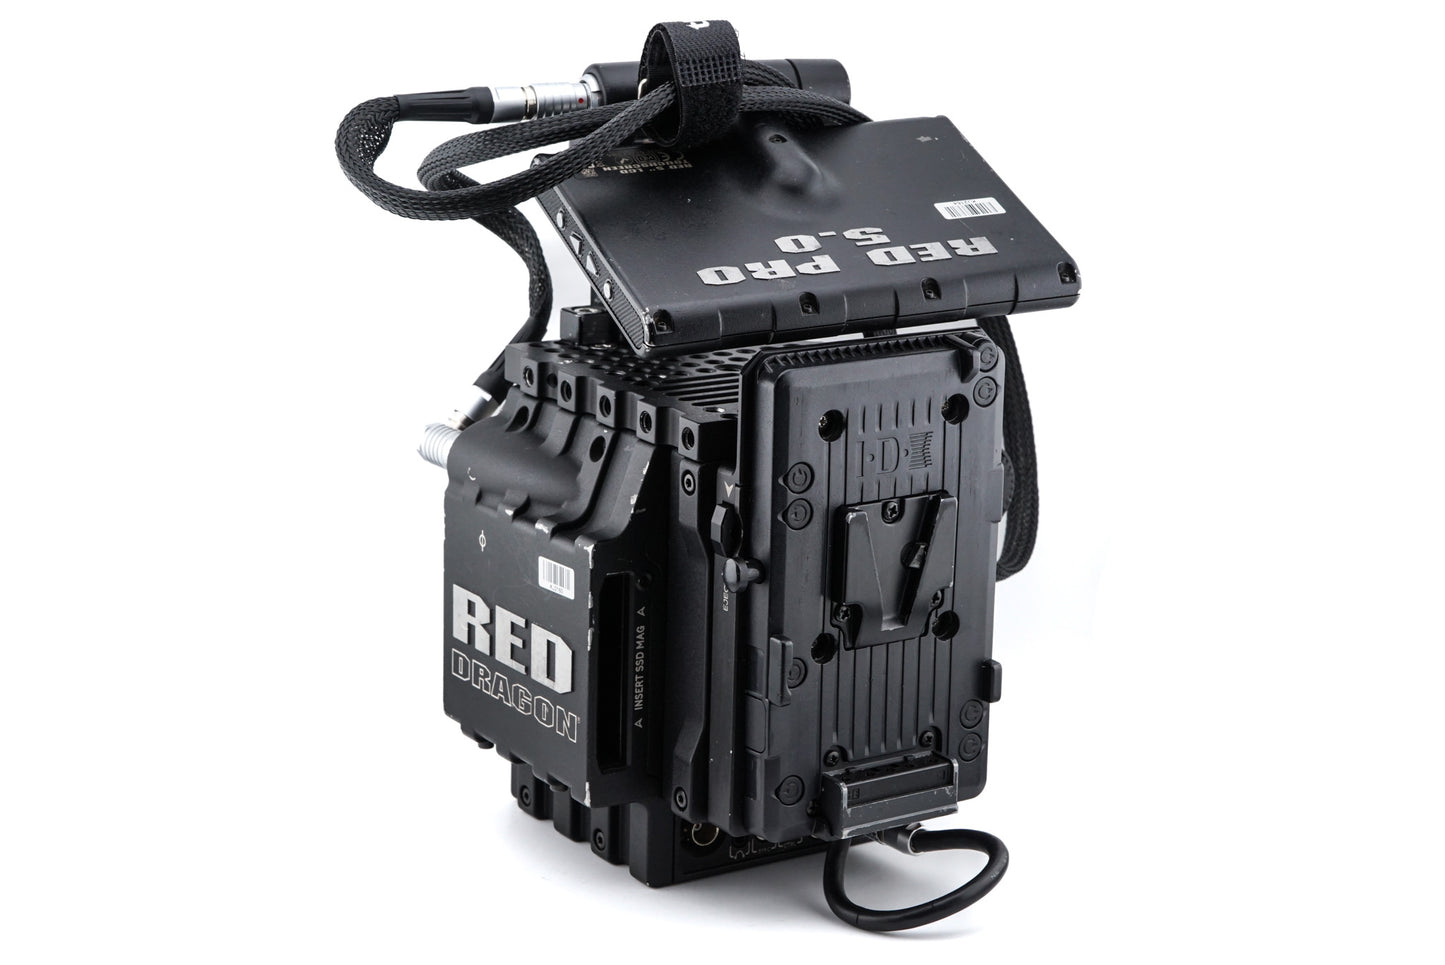 Red Epic-M Dragon 6K + Station Redmag 1.8" + Pro 5" LCD Touchscreen + Redmote + Redmag 240GB Solid State Drive + Canon EF Mount Plate for Red Cameras